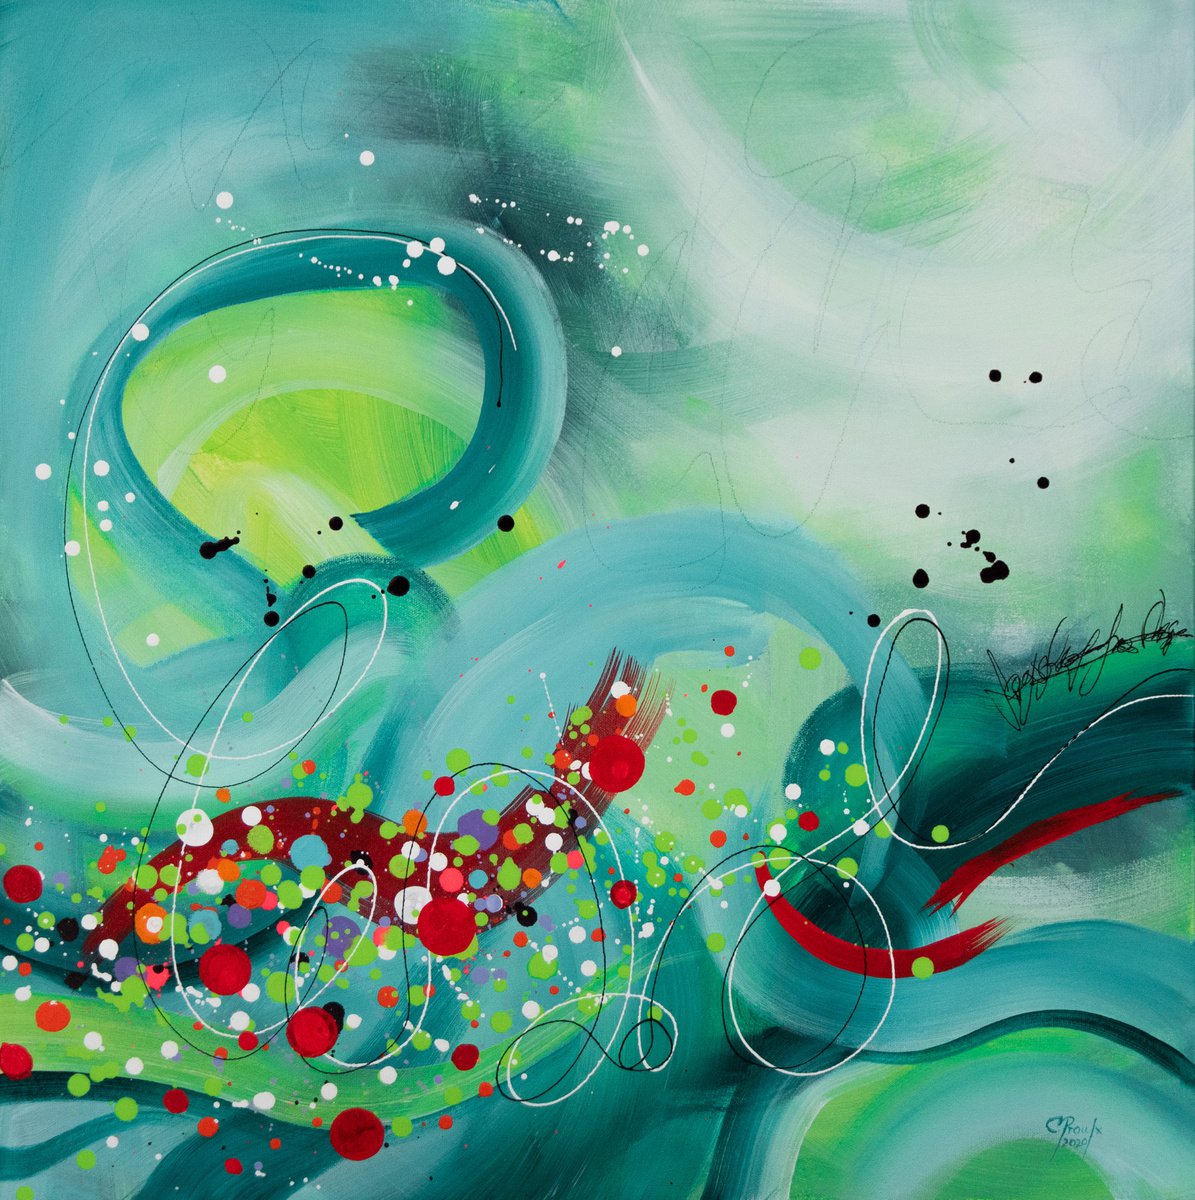 Ocean bloom 2 - Original bold abstract on canvas - Ready to hang by Chantal Proulx